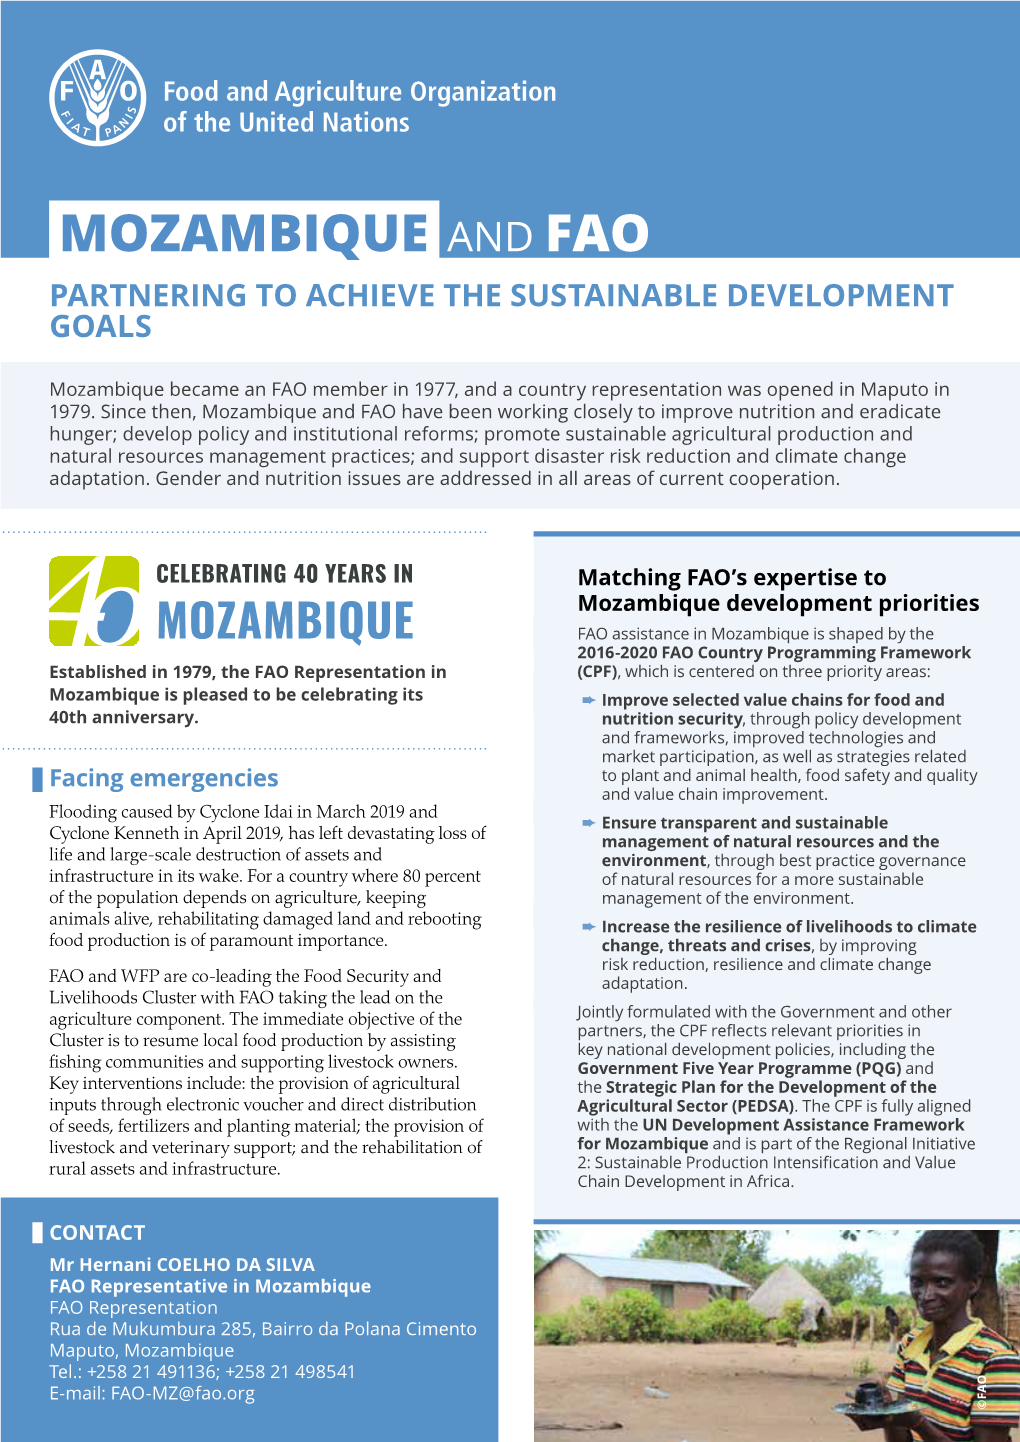 Mozambique and Fao Partnering to Achieve the Sustainable Development Goals